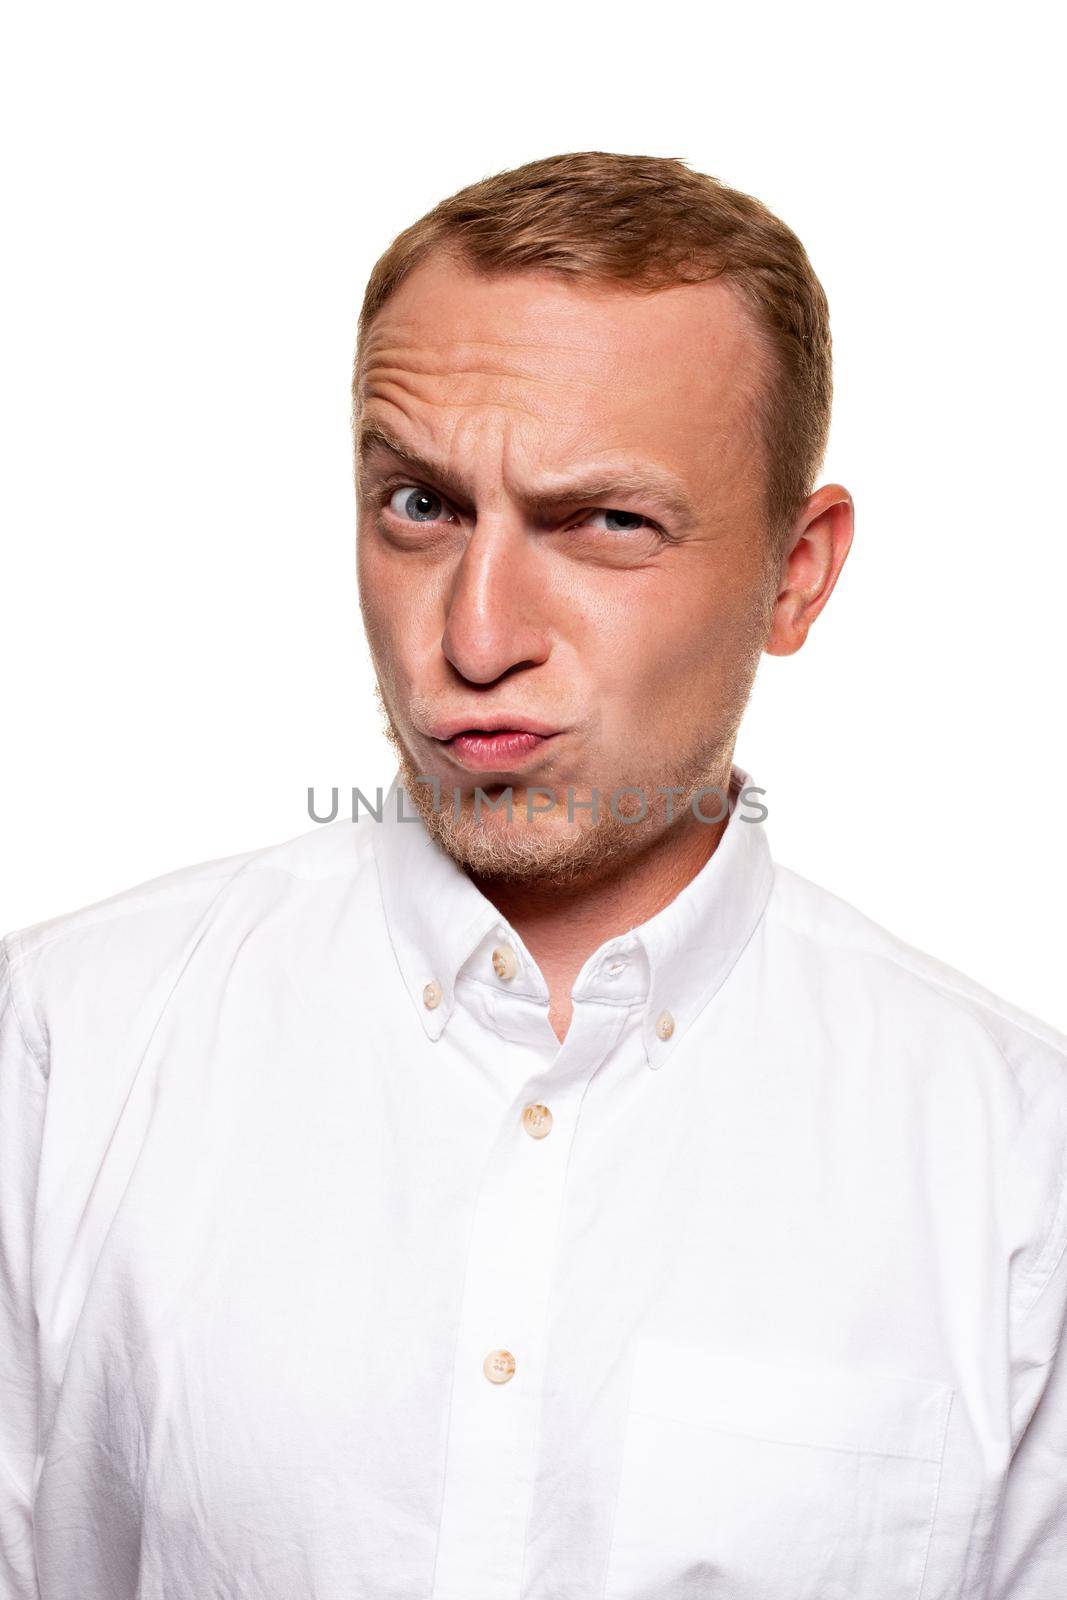 Funny young blond man in a white shirt is grining, isolated on a white background